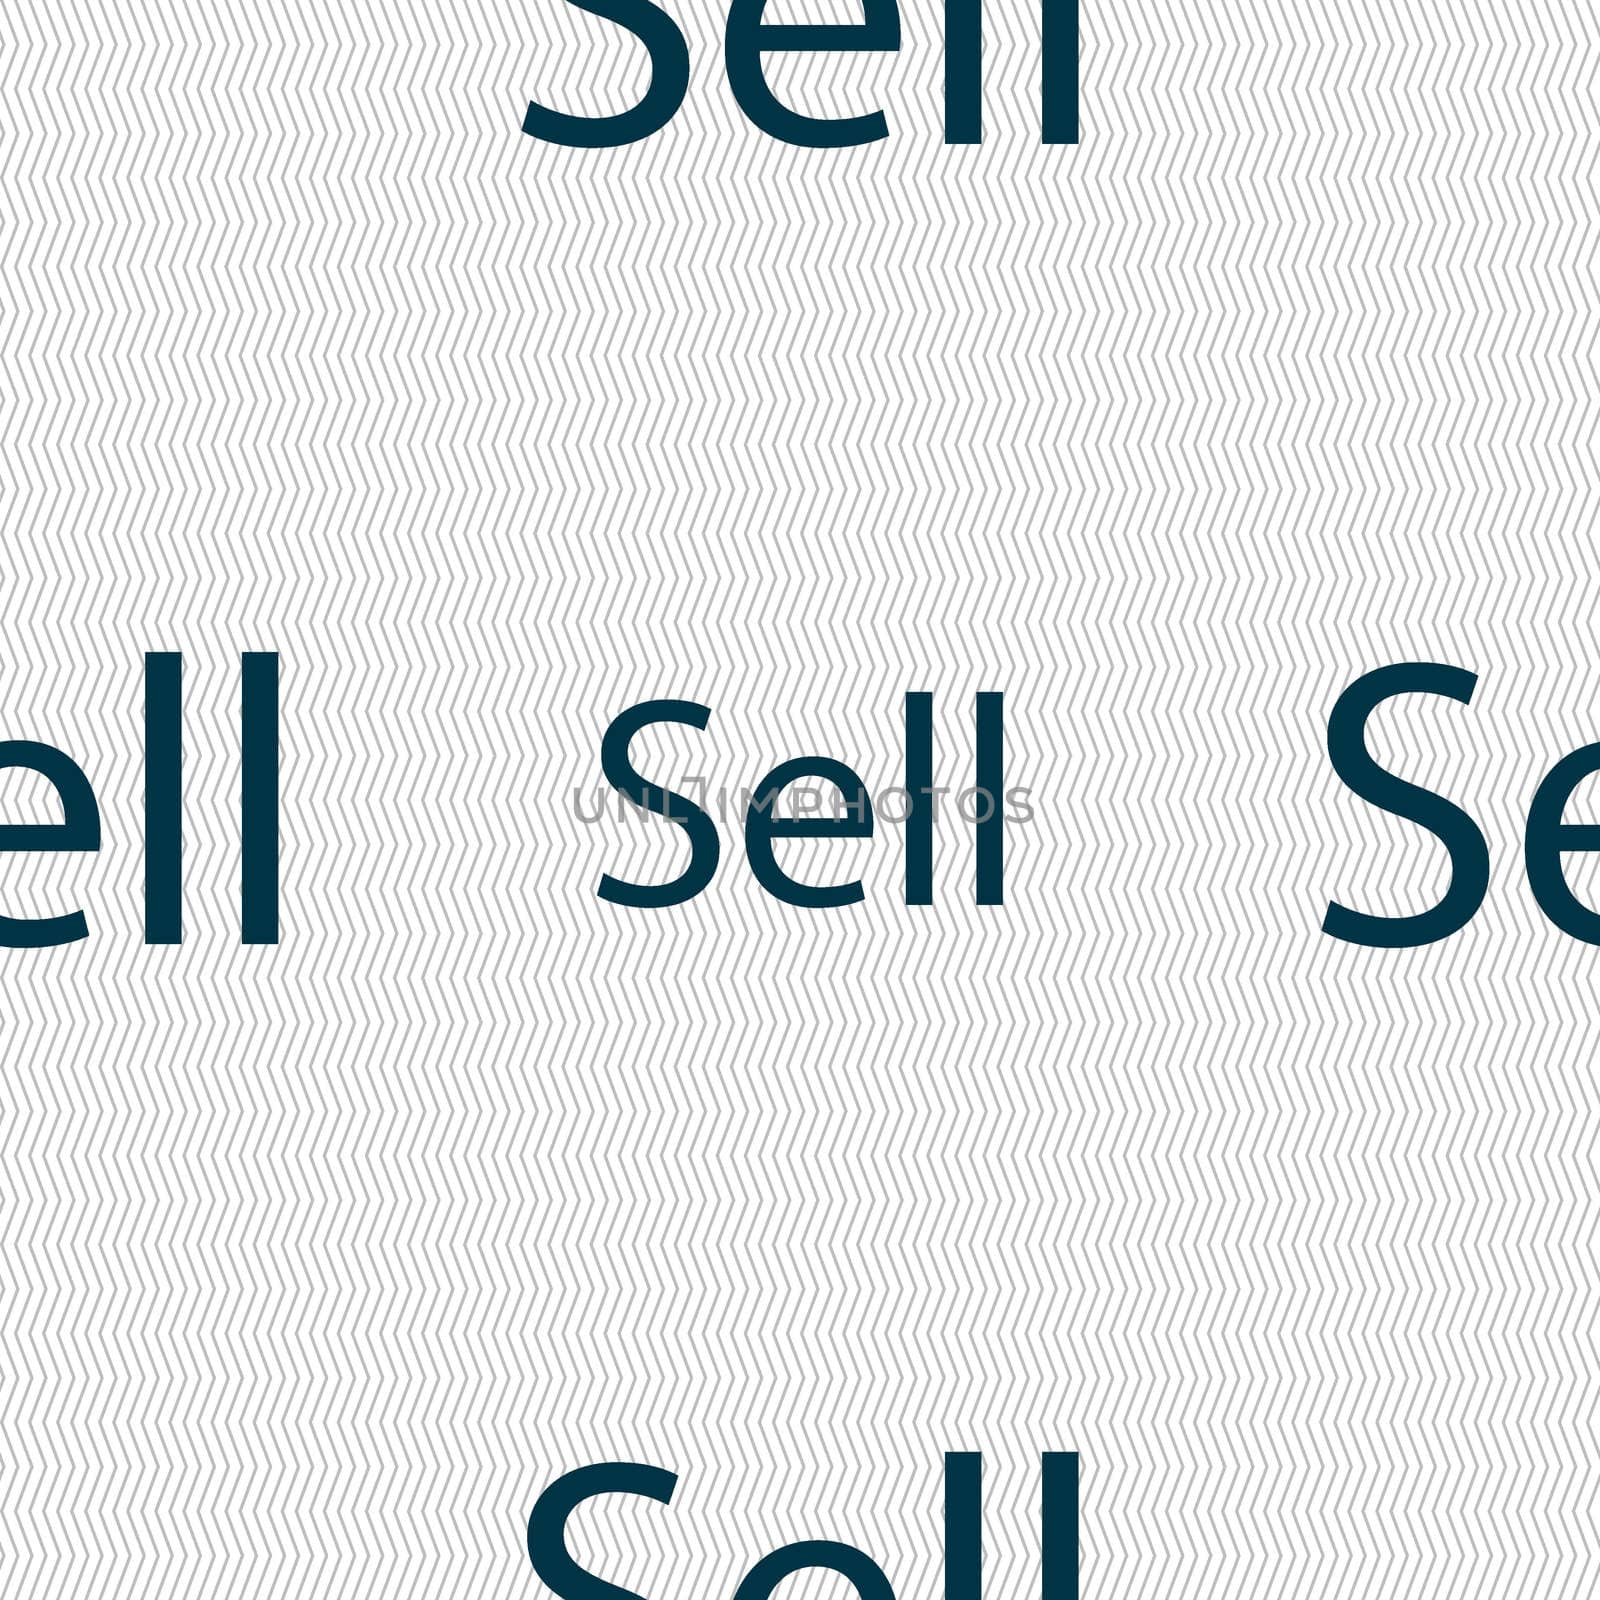 Sell sign icon. Contributor earnings button. Seamless abstract background with geometric shapes. illustration